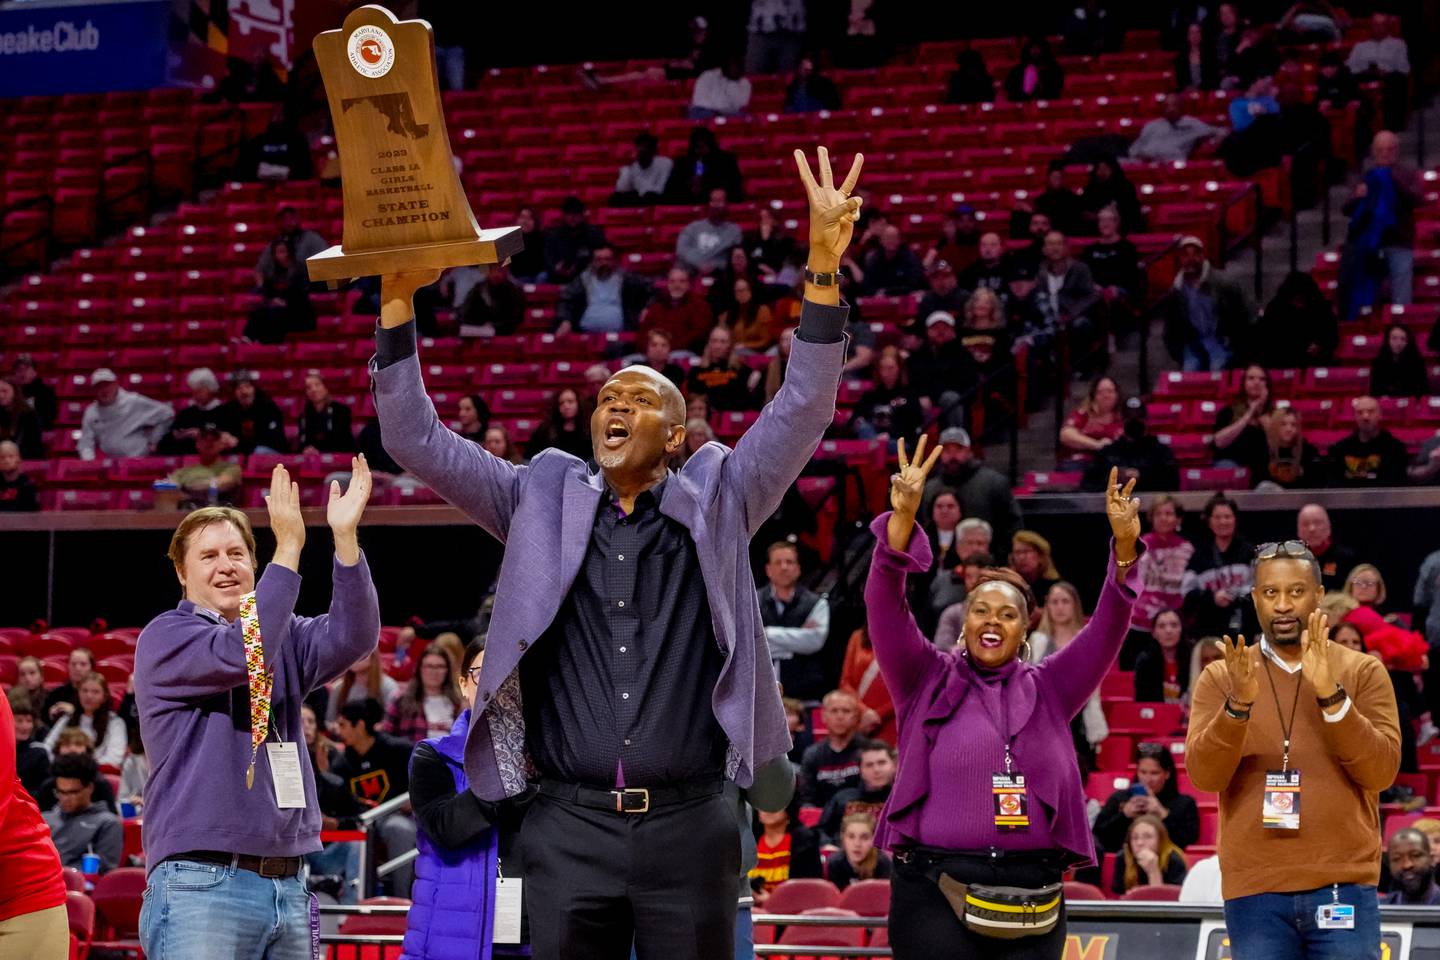 Pikesville Head Coach Michael Dukes celebrates his team's third straight state title (not including the COVID-year gap in between) after winning the MPSSAA High School 1A Girls Championship between Pikesville and Mountain Ridge at Xfinity Center on the University of Maryland campus in College Park.